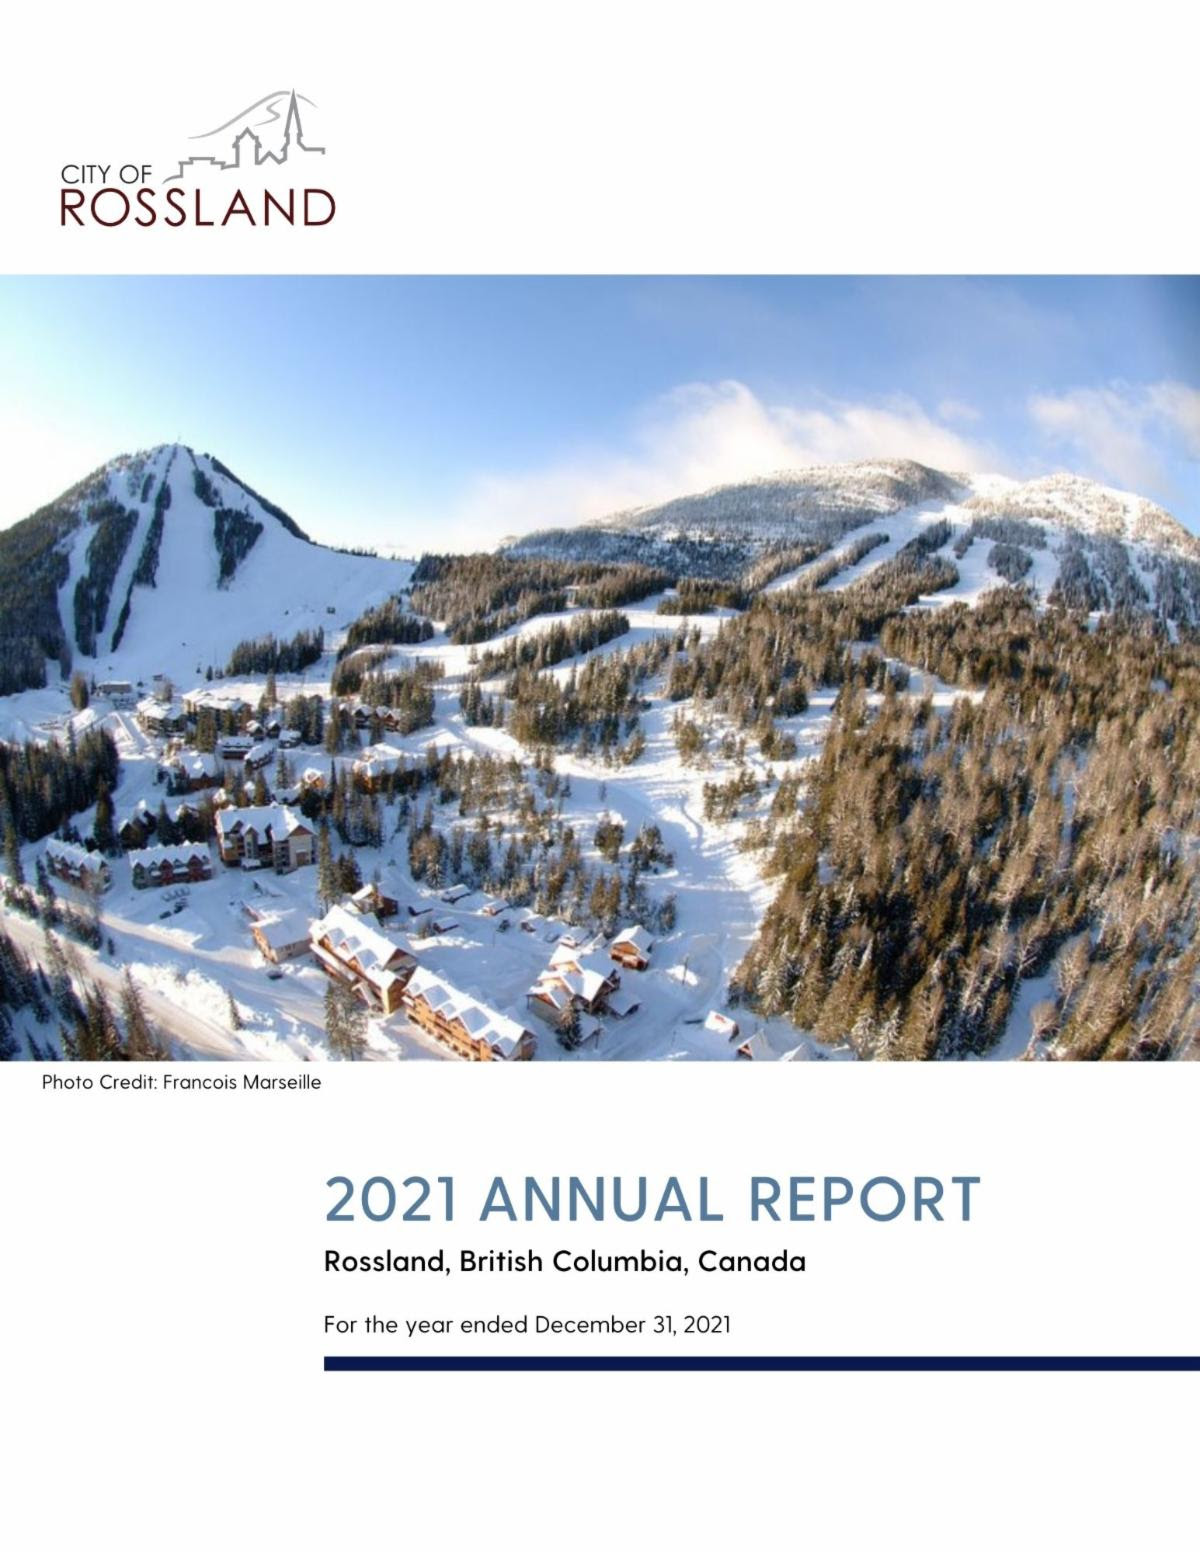 2021 Draft Annual Report is Now Available For Public Inspection